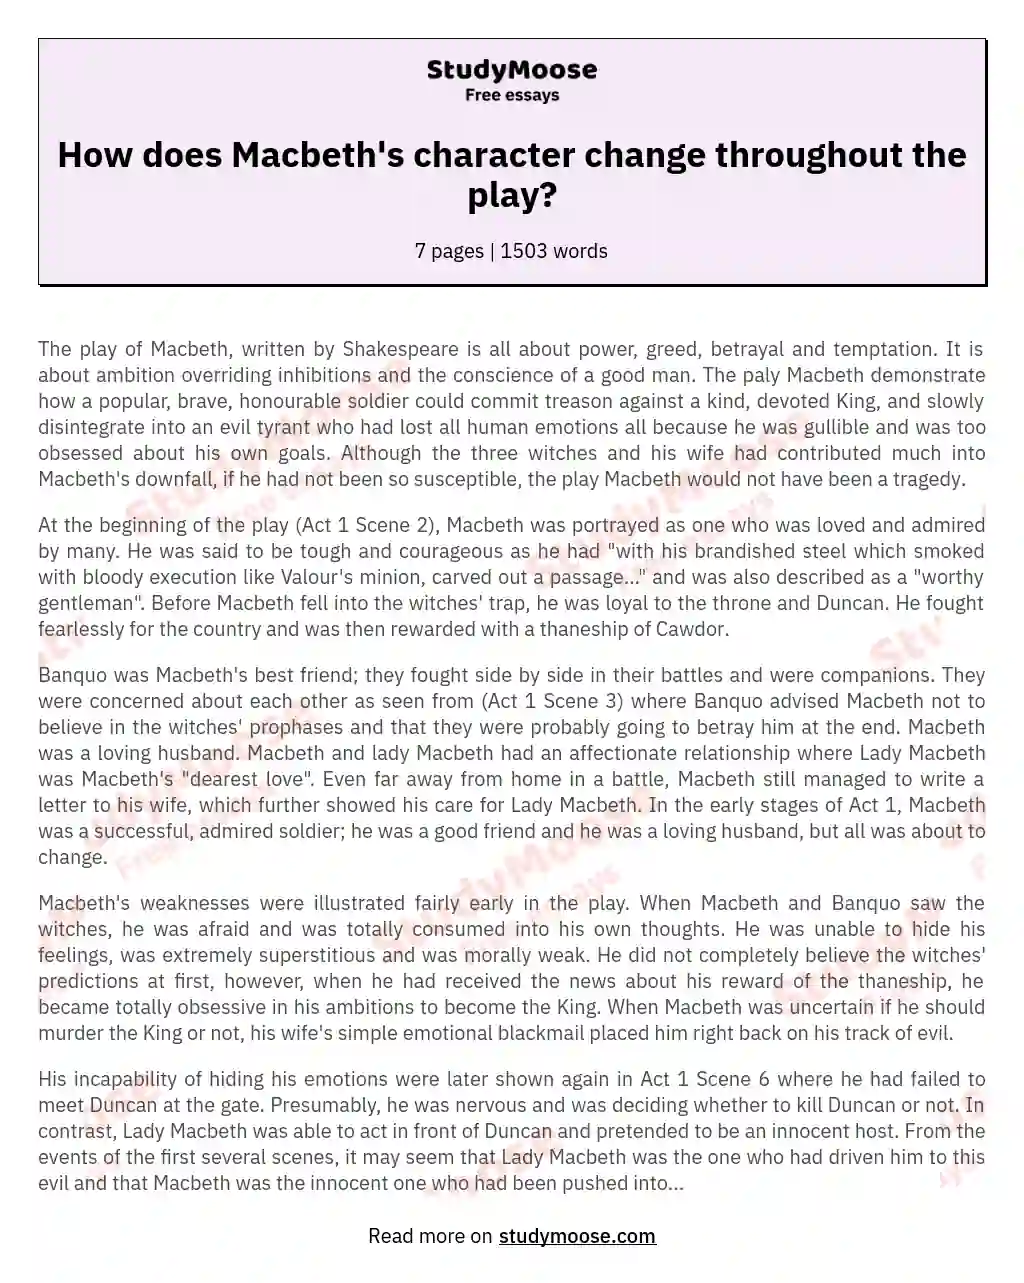 How does Macbeth's character change throughout the play? essay